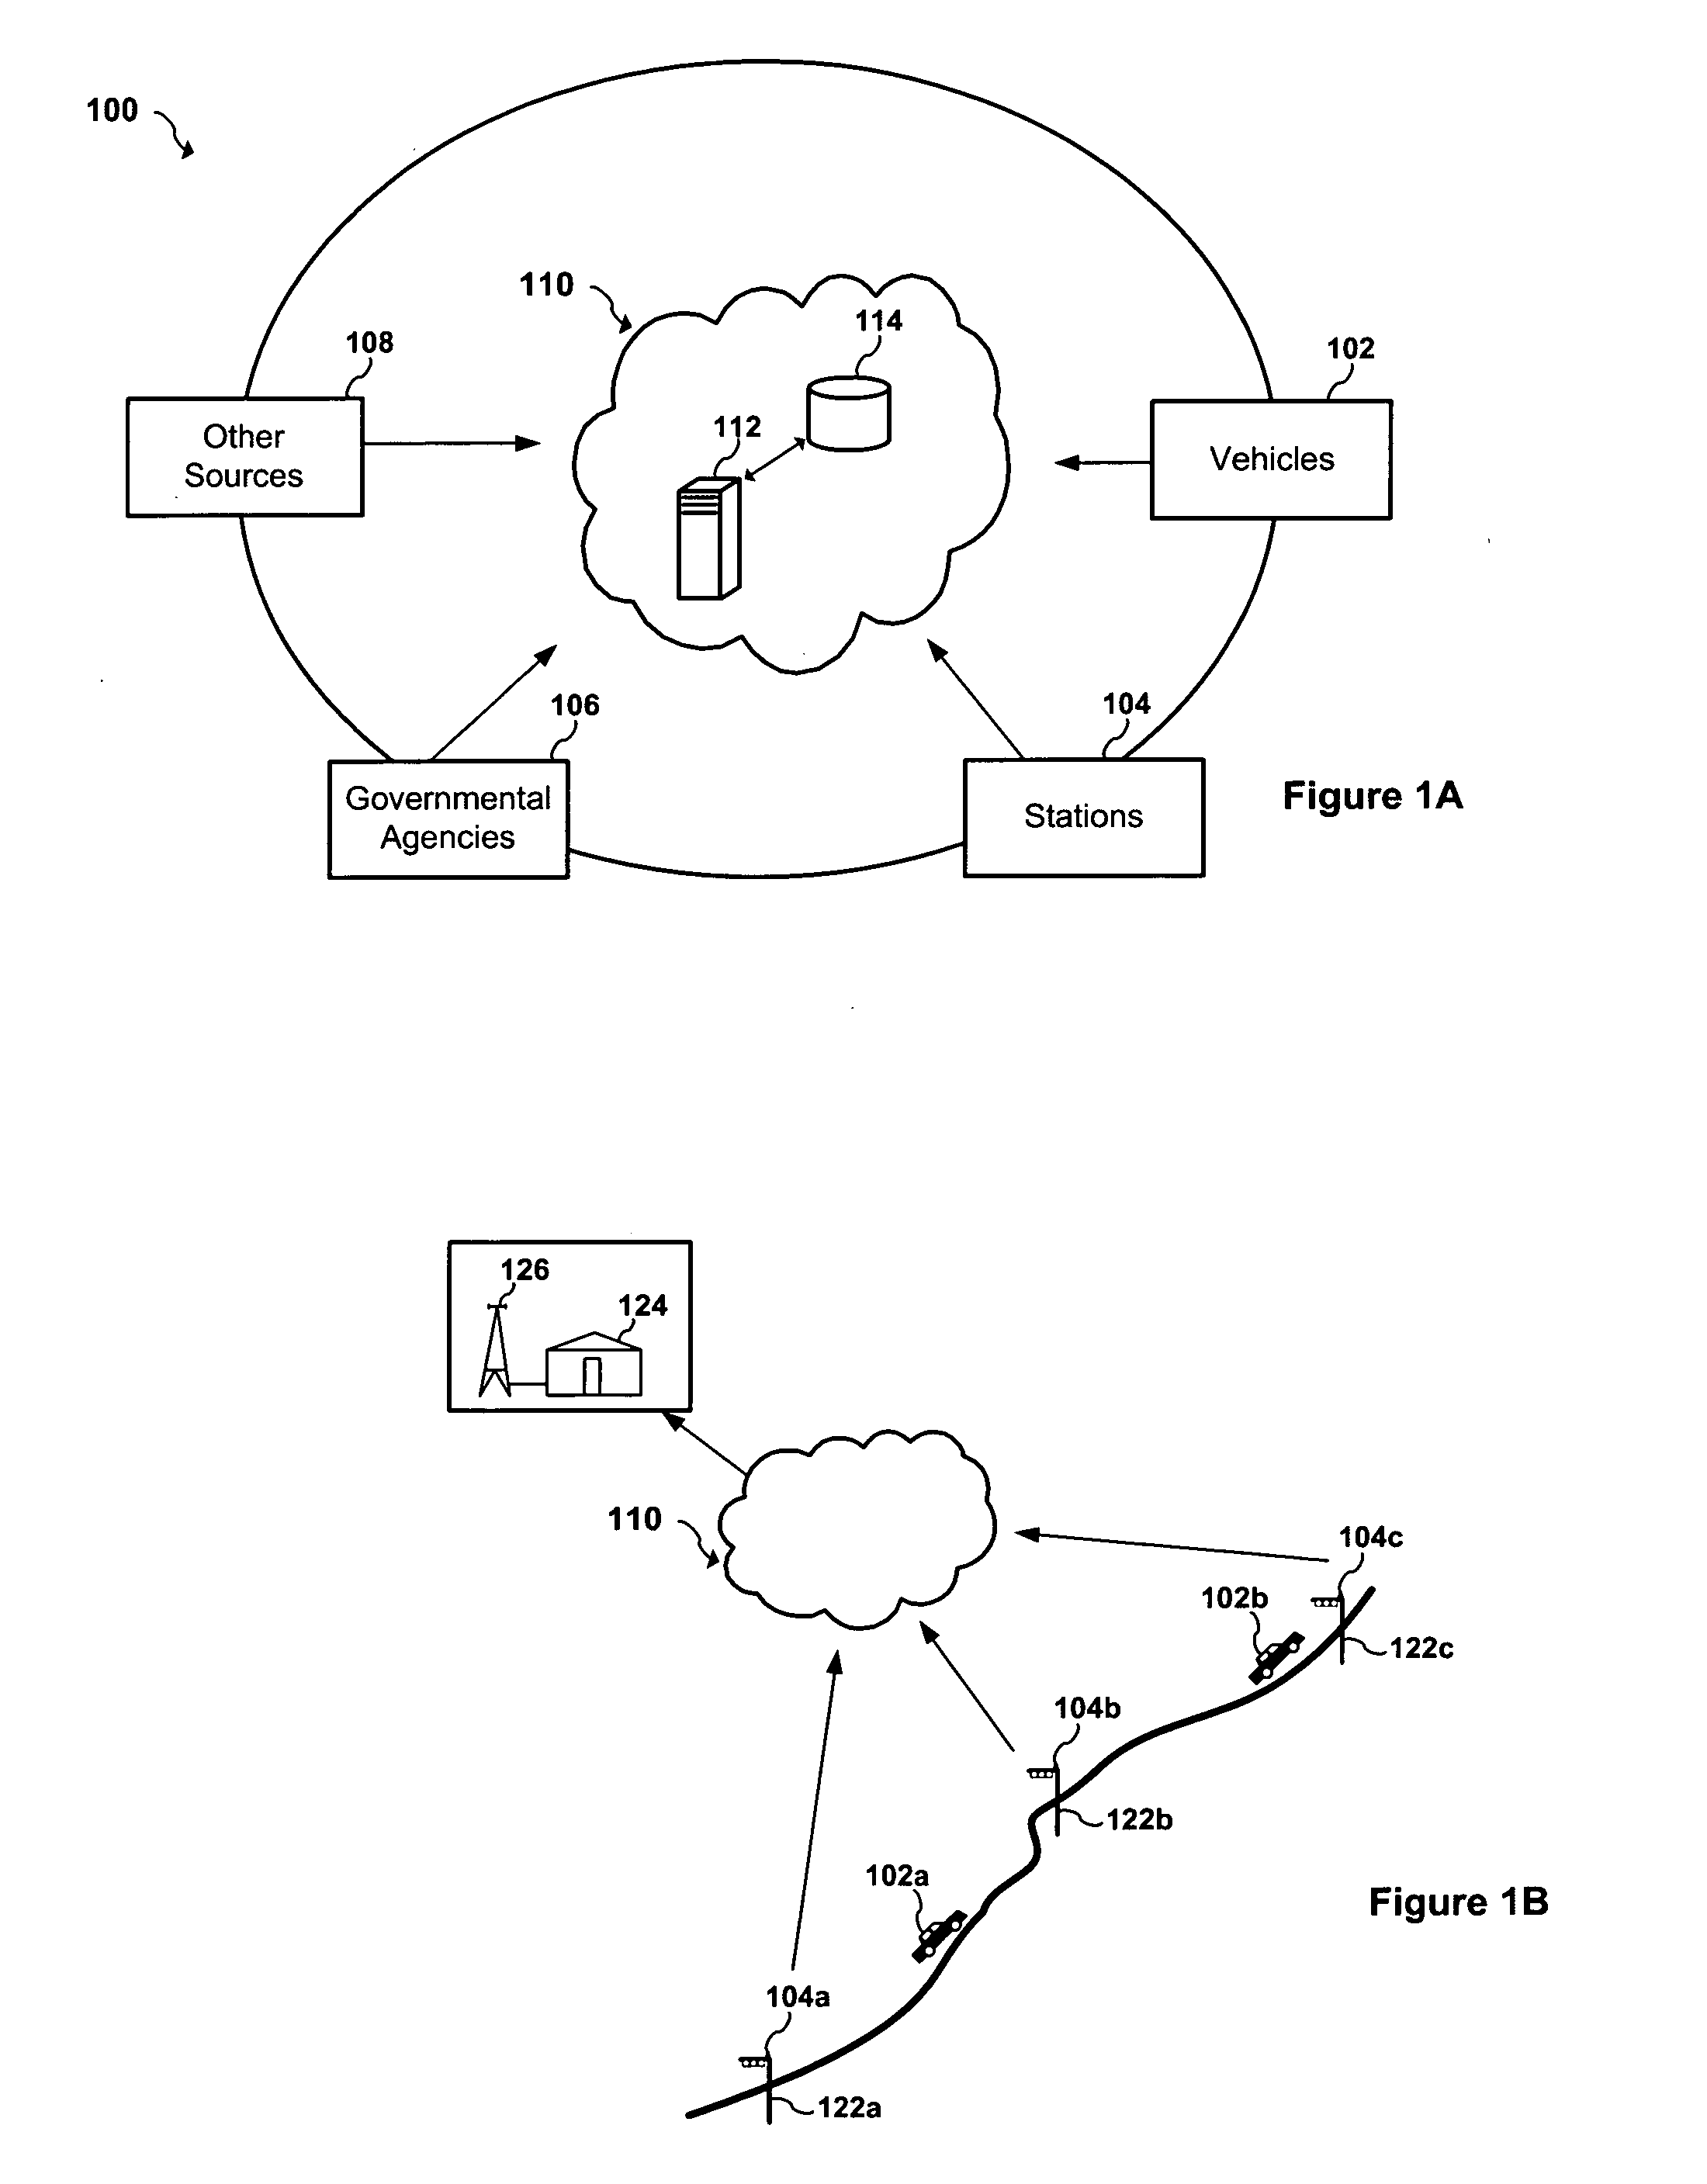 Apparatus and system for monitoring and managing traffic flow